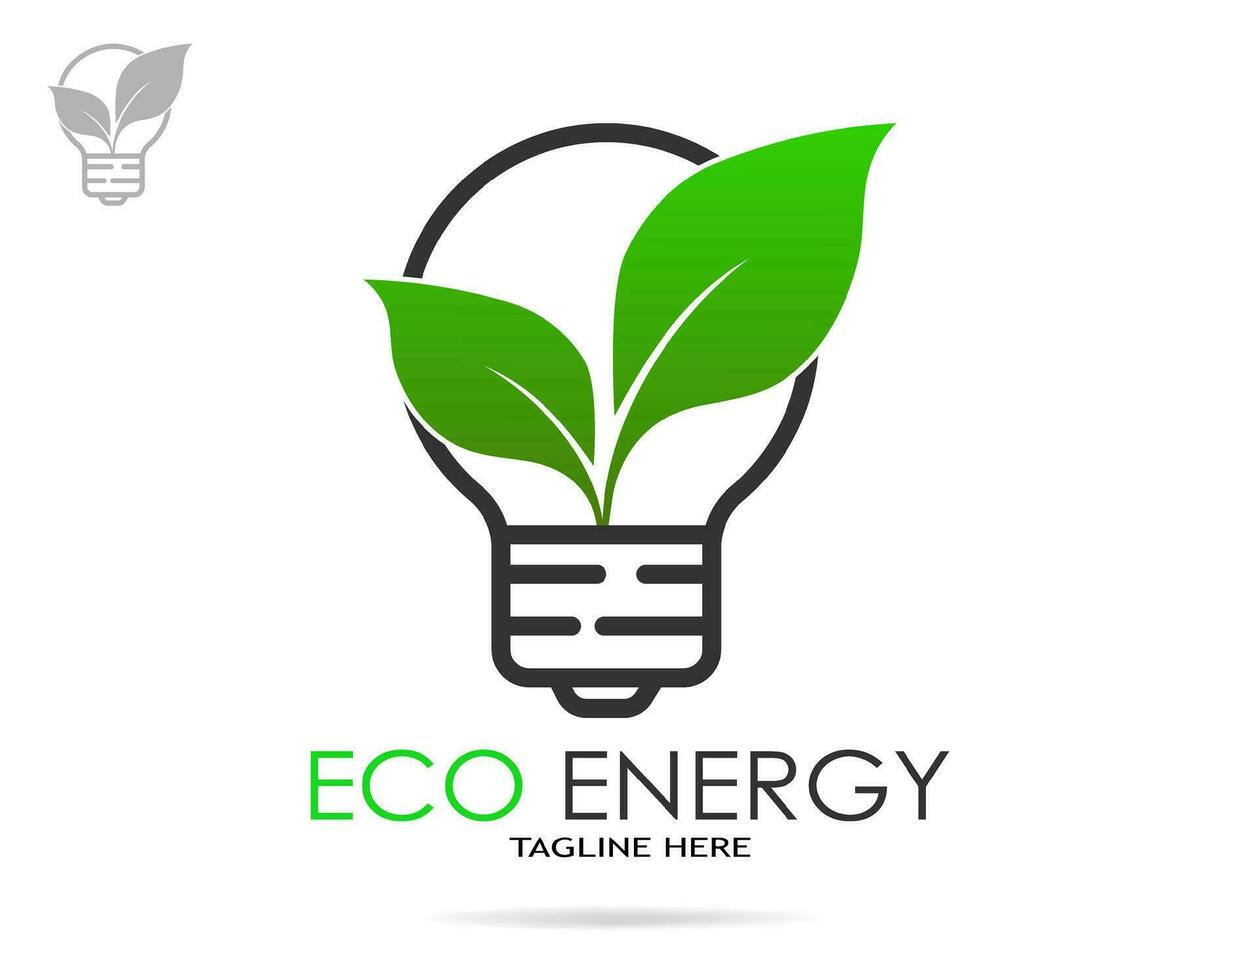 Trees with green leaves look beautiful and refreshing. Tree and energy LOGO style. vector